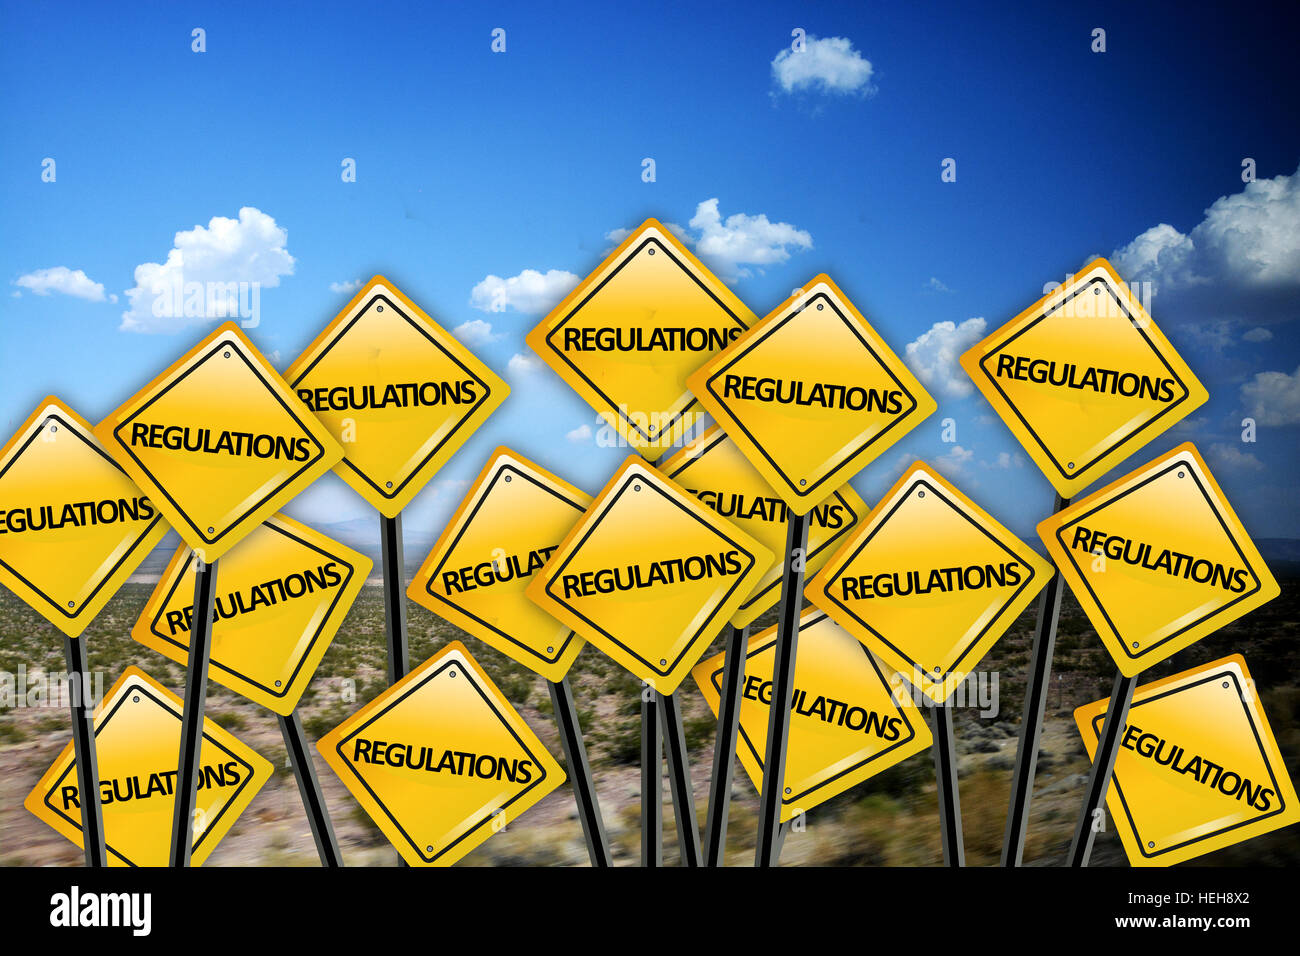 Regulation concept on yellow road sign with blue sky and white clouds Stock Photo